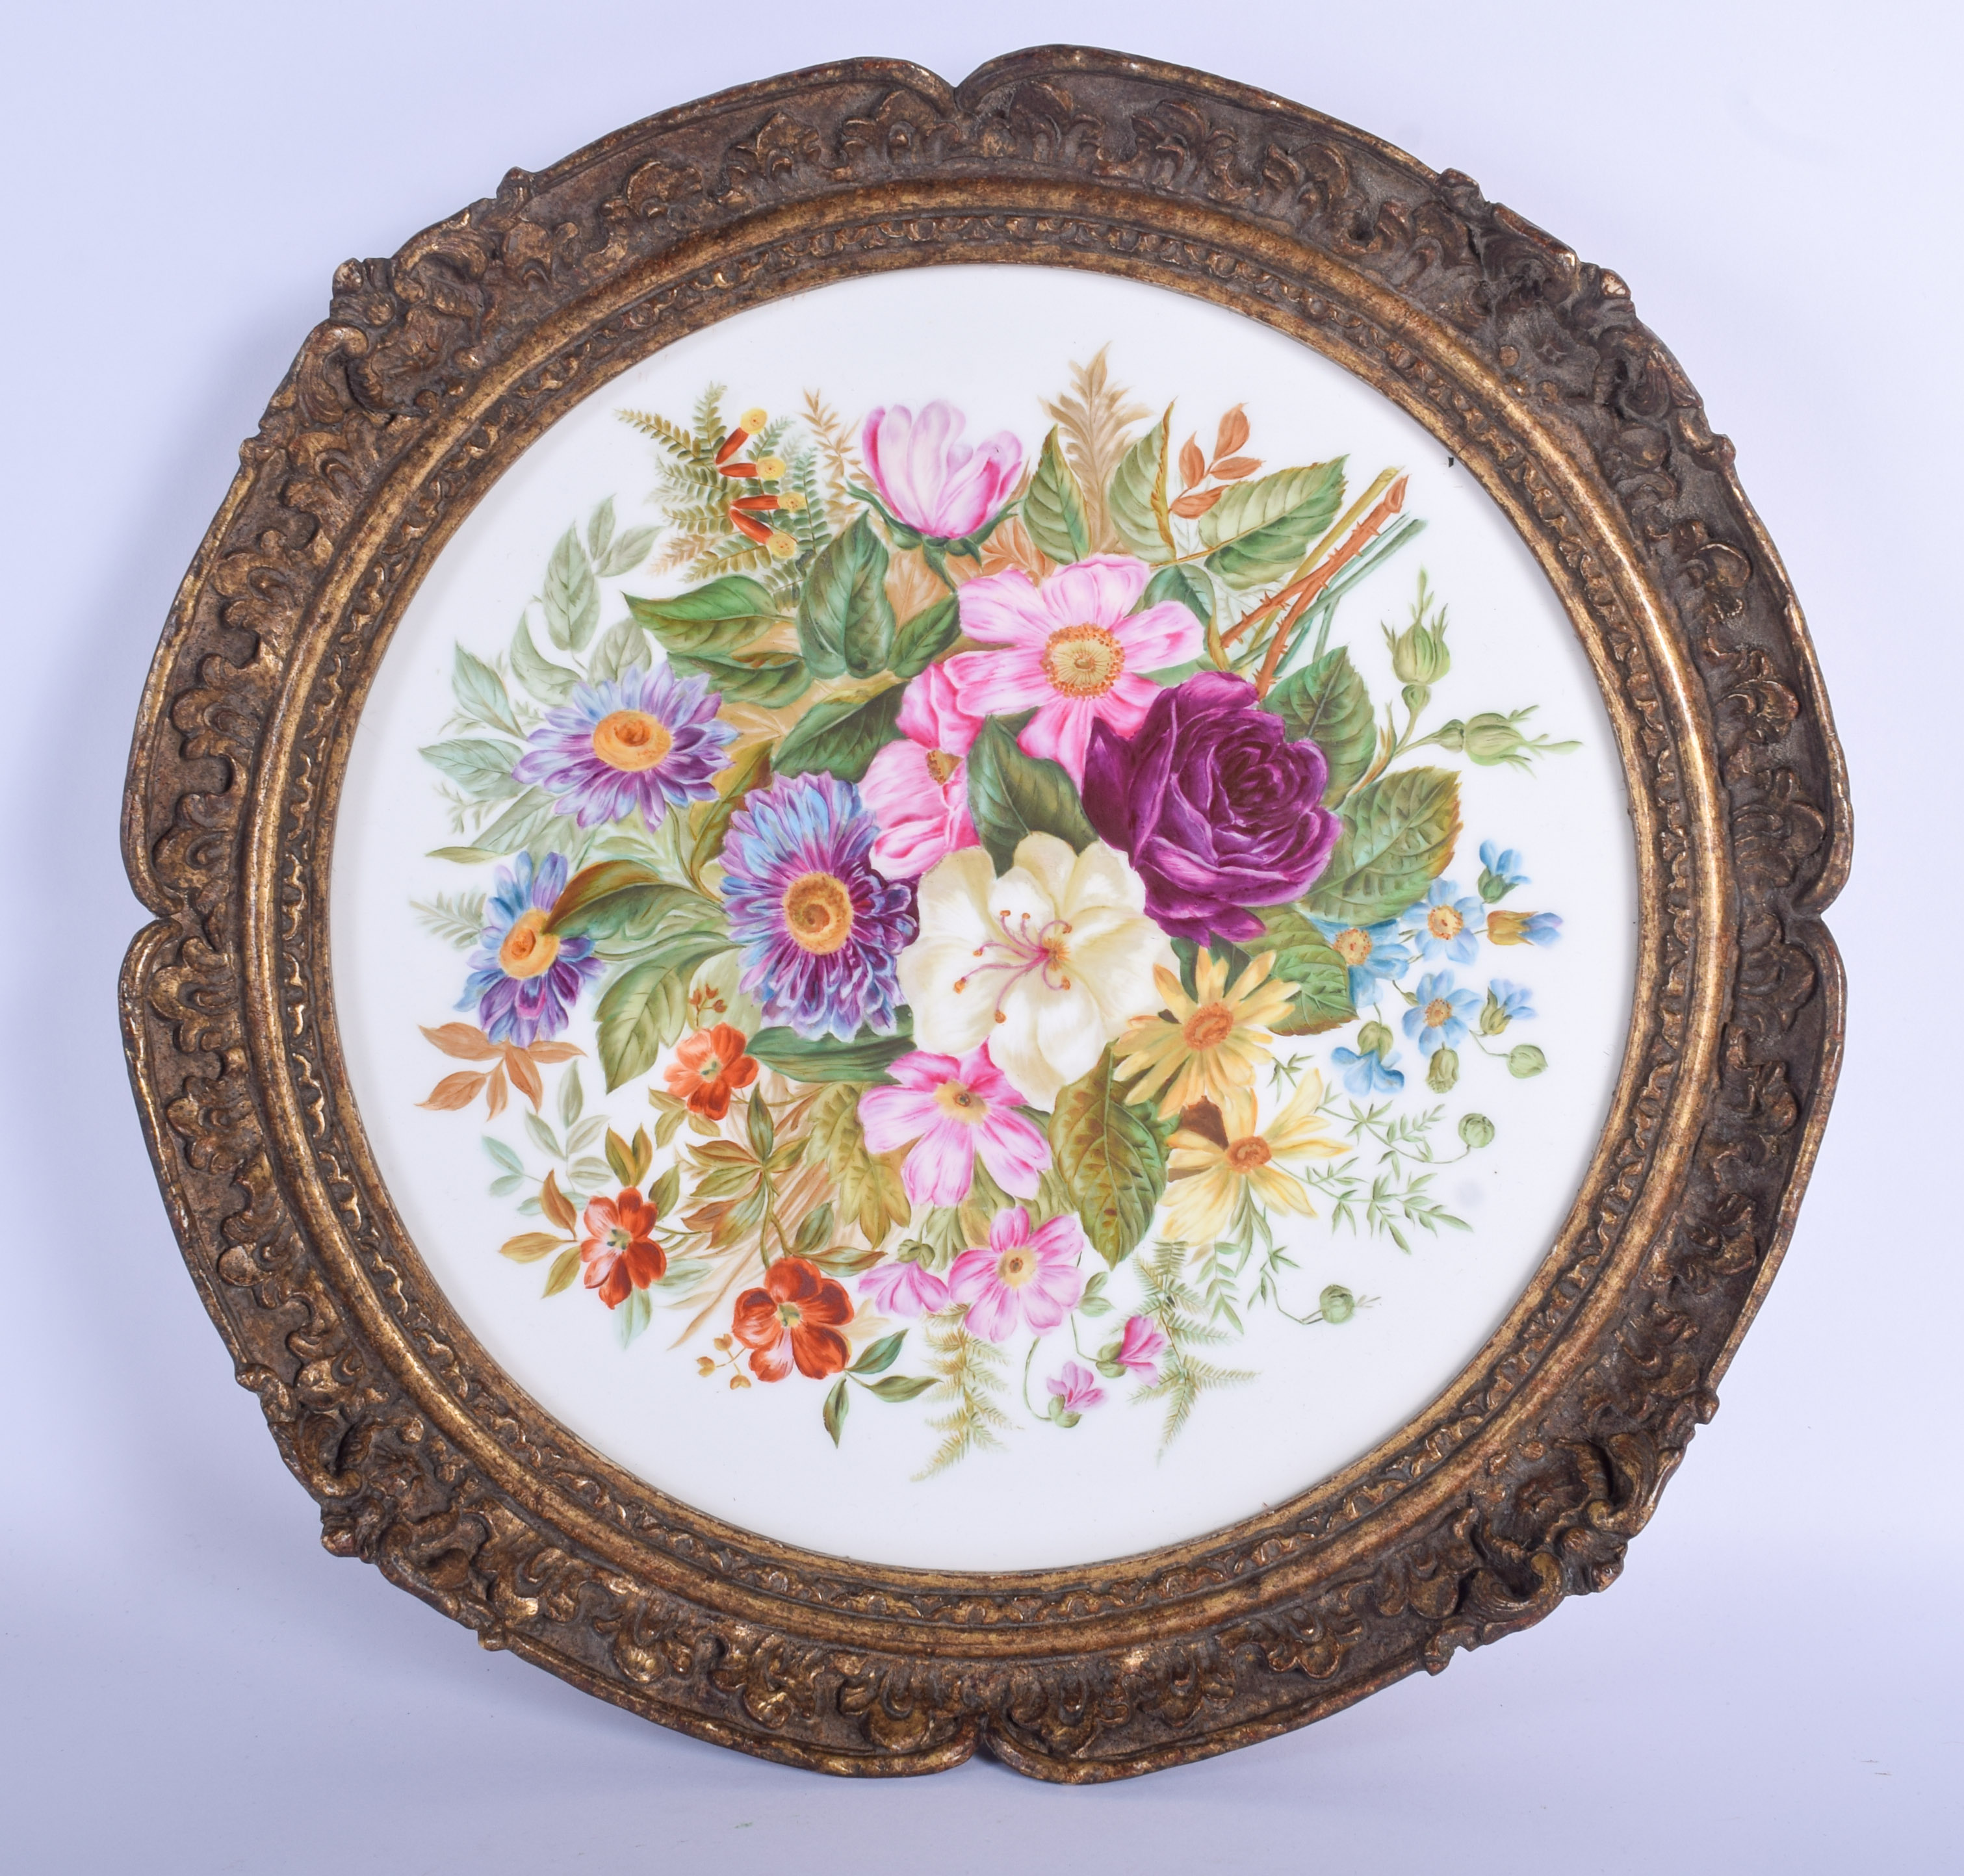 A superb early 19th c. English porcelain plaque lavishly painted with flowers in a circular gilded f